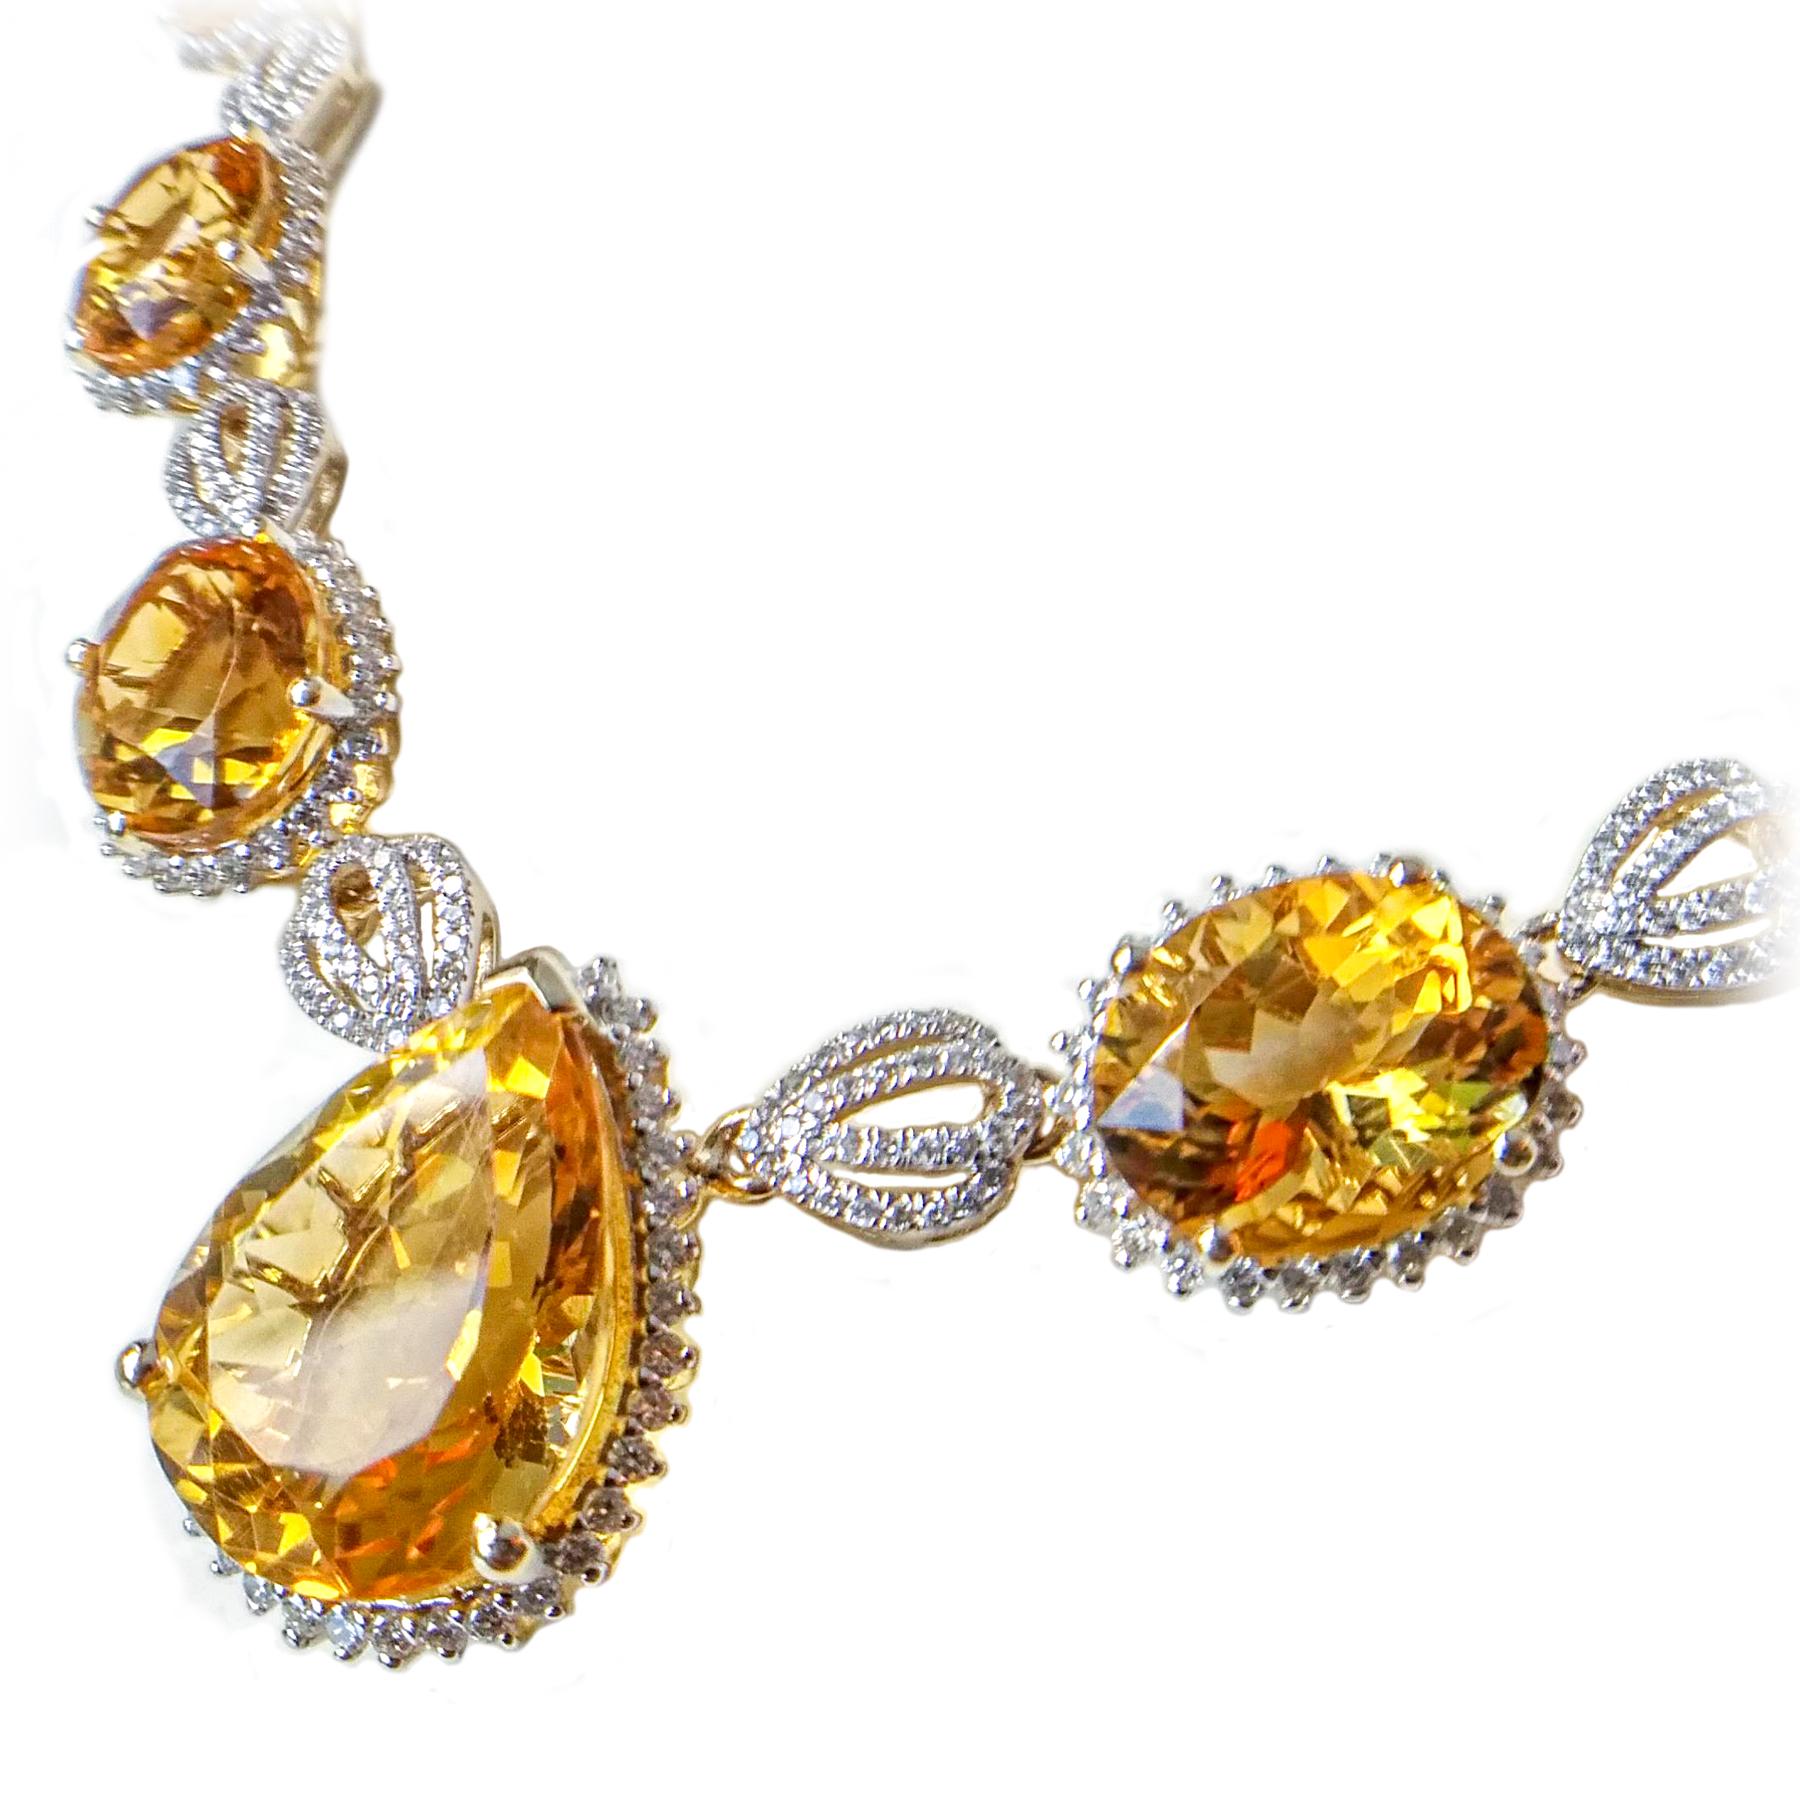 Striking citrine and diamond necklace earrings set. Handcrafted lively golden honey yellow, high luster, eleven matched, oval and pear shape 34.68 carats citrines encased in basket mounting, surrounded in round brilliant cut diamonds. Contemporary